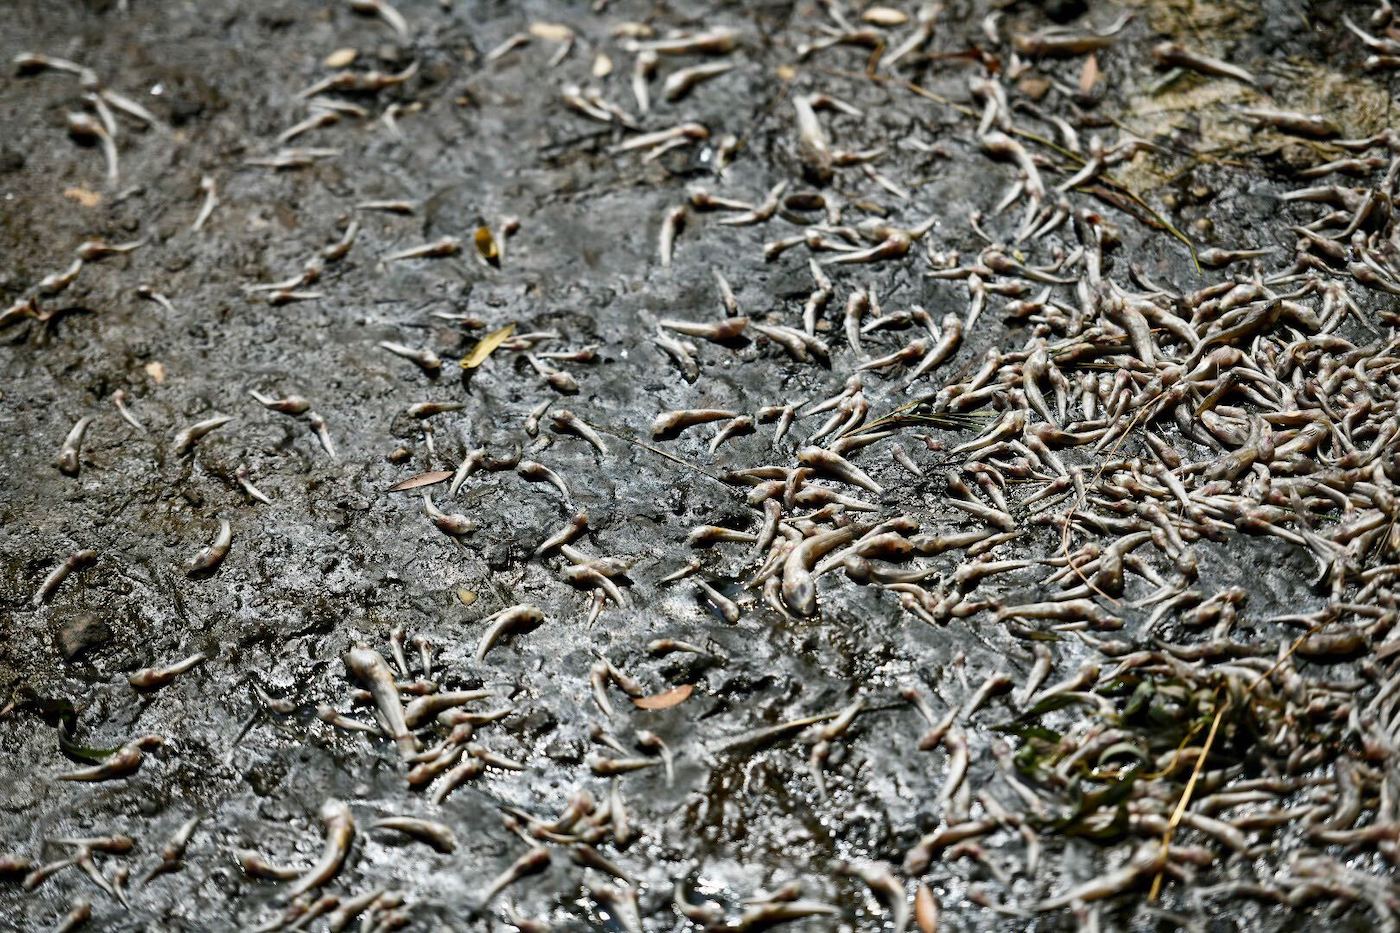 Hundreds of small, dead silver fish trampled in dirty sand, their scales barely glinting in the light.